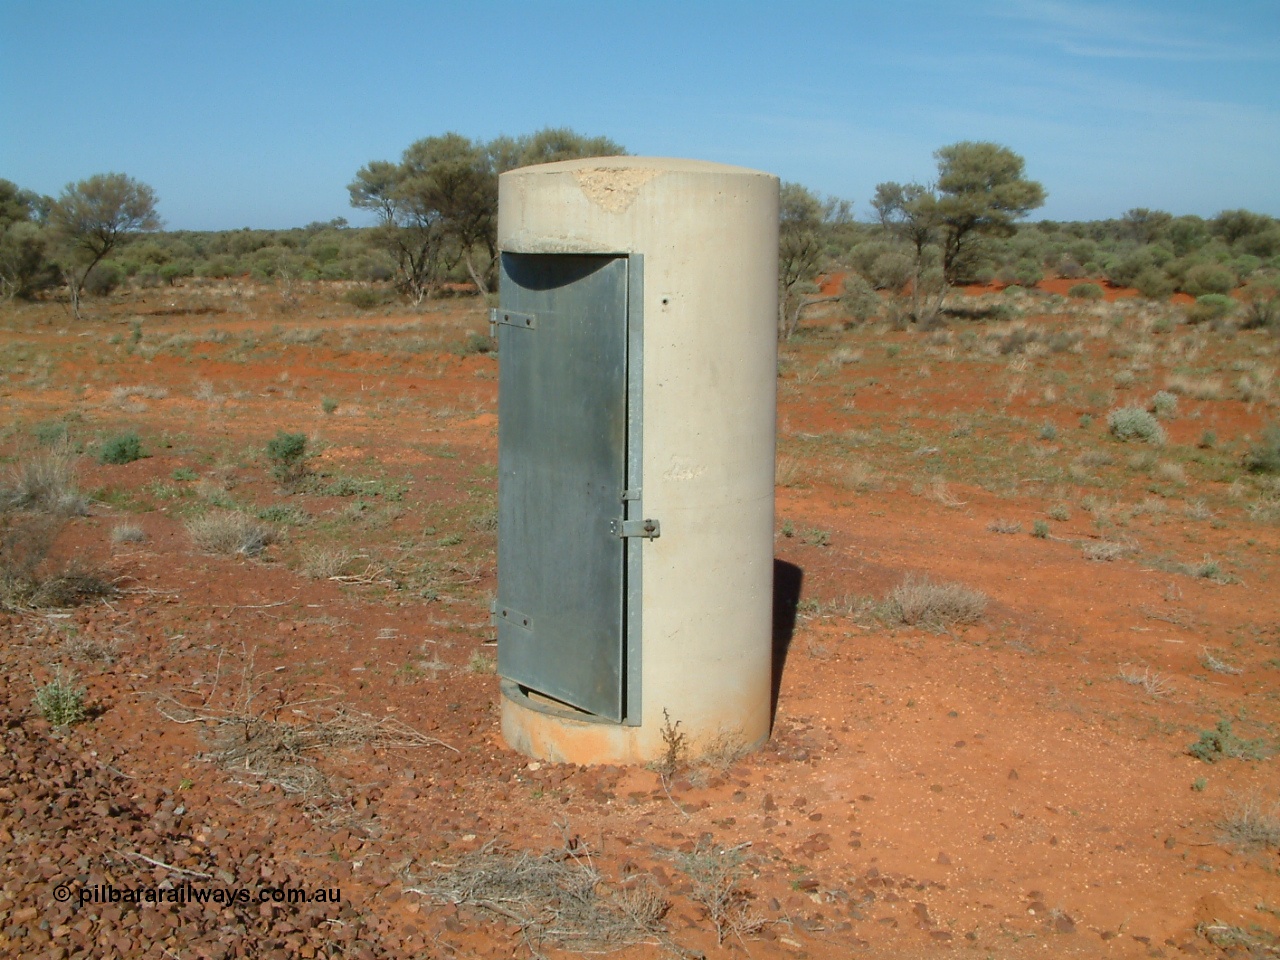 030416 094500
Wirrida Siding, train control phone booth 'pillbox'. Located at the 641 km from the 0 datum at Coonamia and 137 km north of Tarcoola between Carnes and Manguri on the Tarcoola - Alice Springs line. [url=https://goo.gl/maps/eznFBHok5p6yPEcq6]GeoData location[/url]. 16th April 2003.
